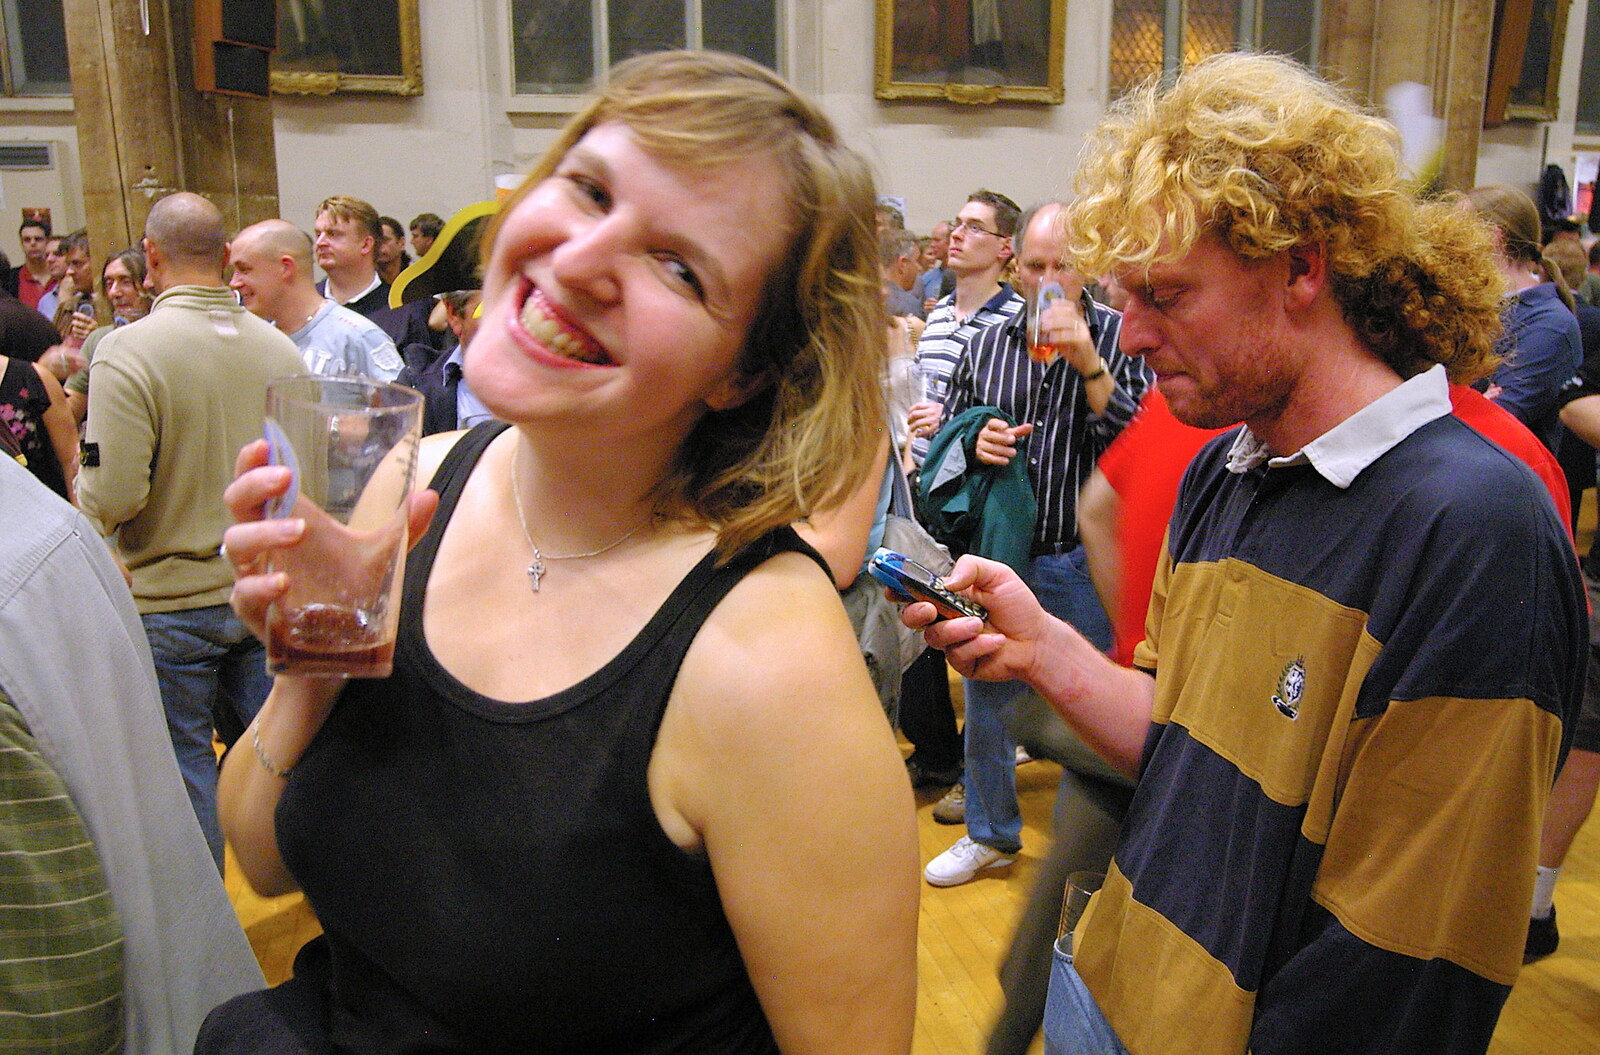 Sarah and Wavy from The 28th Norwich Beer Festival, St. Andrew's Hall, Norwich - 26th October 2005